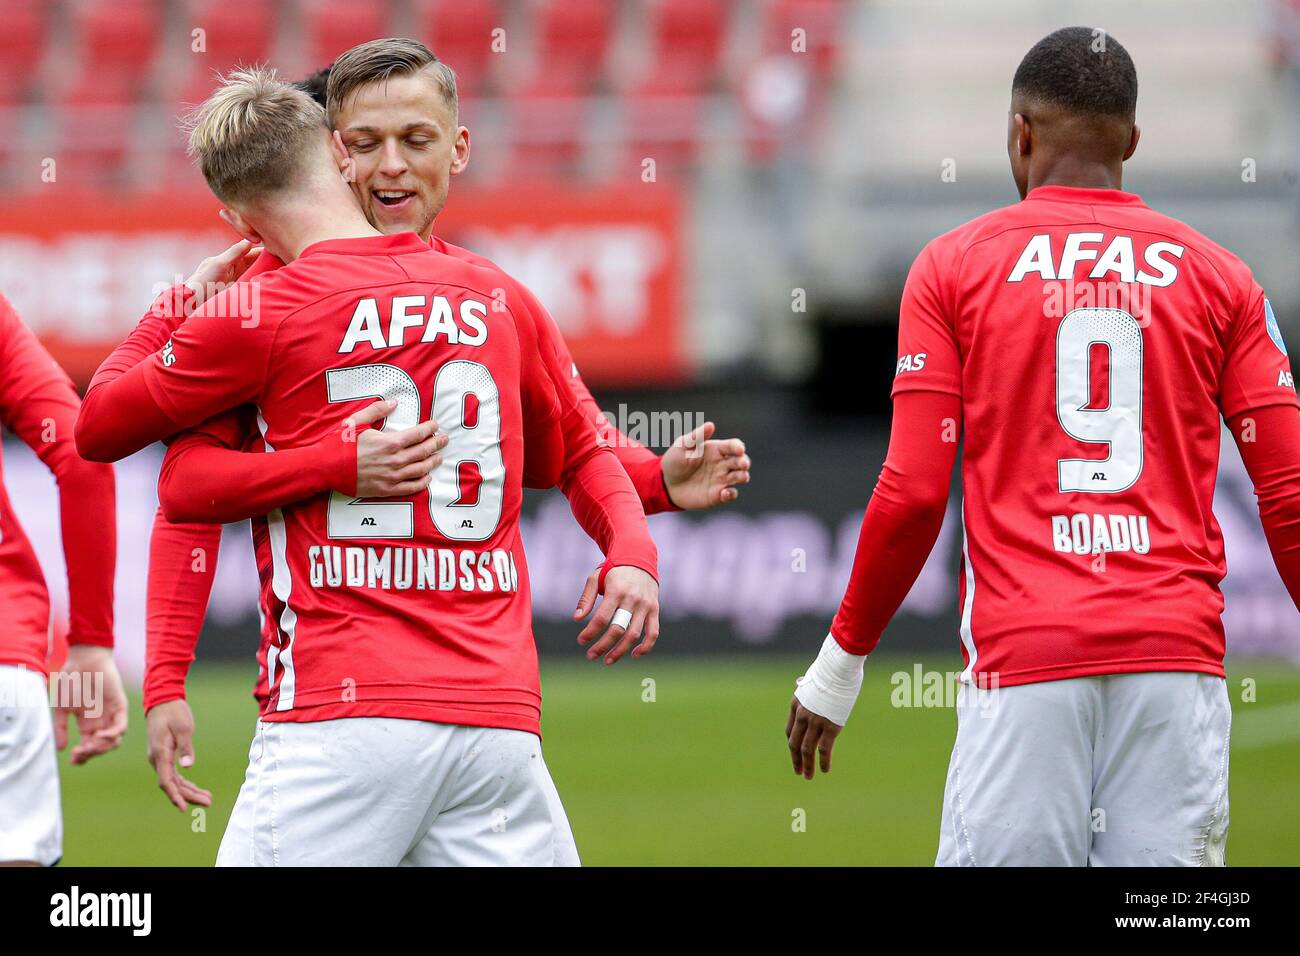 ALKMAAR, NETHERLANDS - MARCH 21: Jesper Karlsson of AZ celebrating the first goal of his side with teammates during the Dutch Eredivsie match between Stock Photo